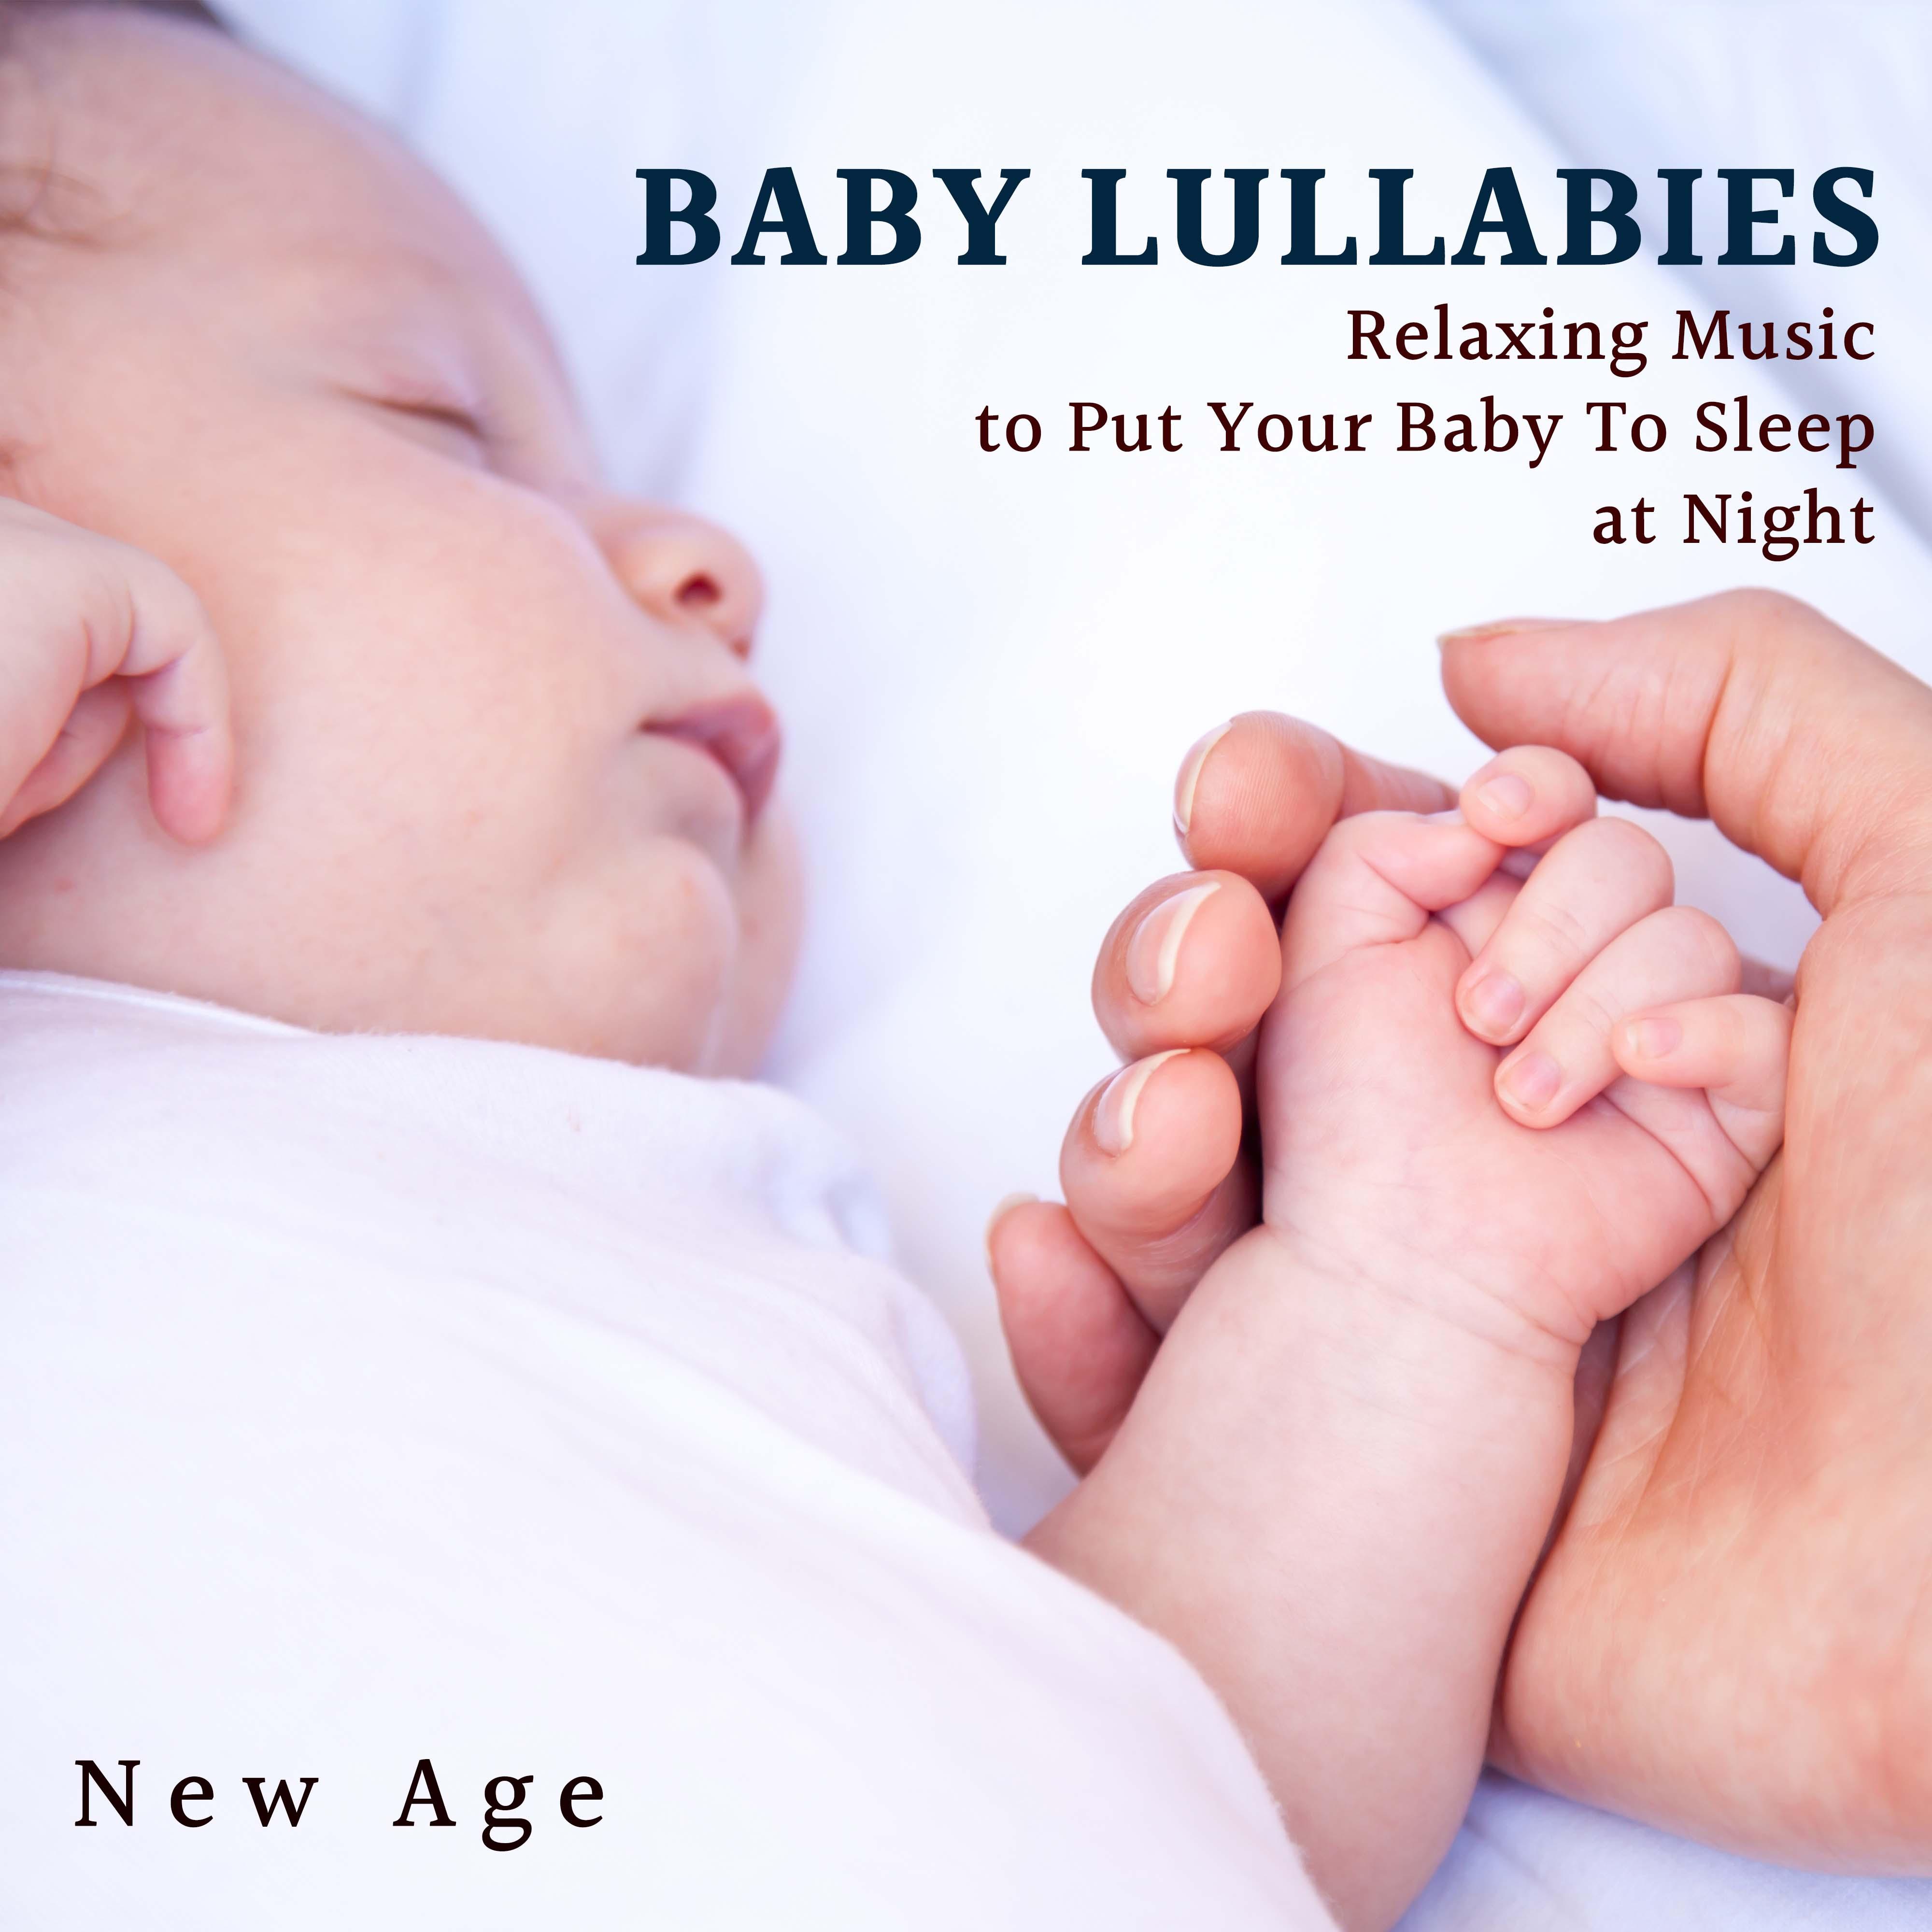 Baby Lullabies - Relaxing Music to Put Your Baby To Sleep at Night